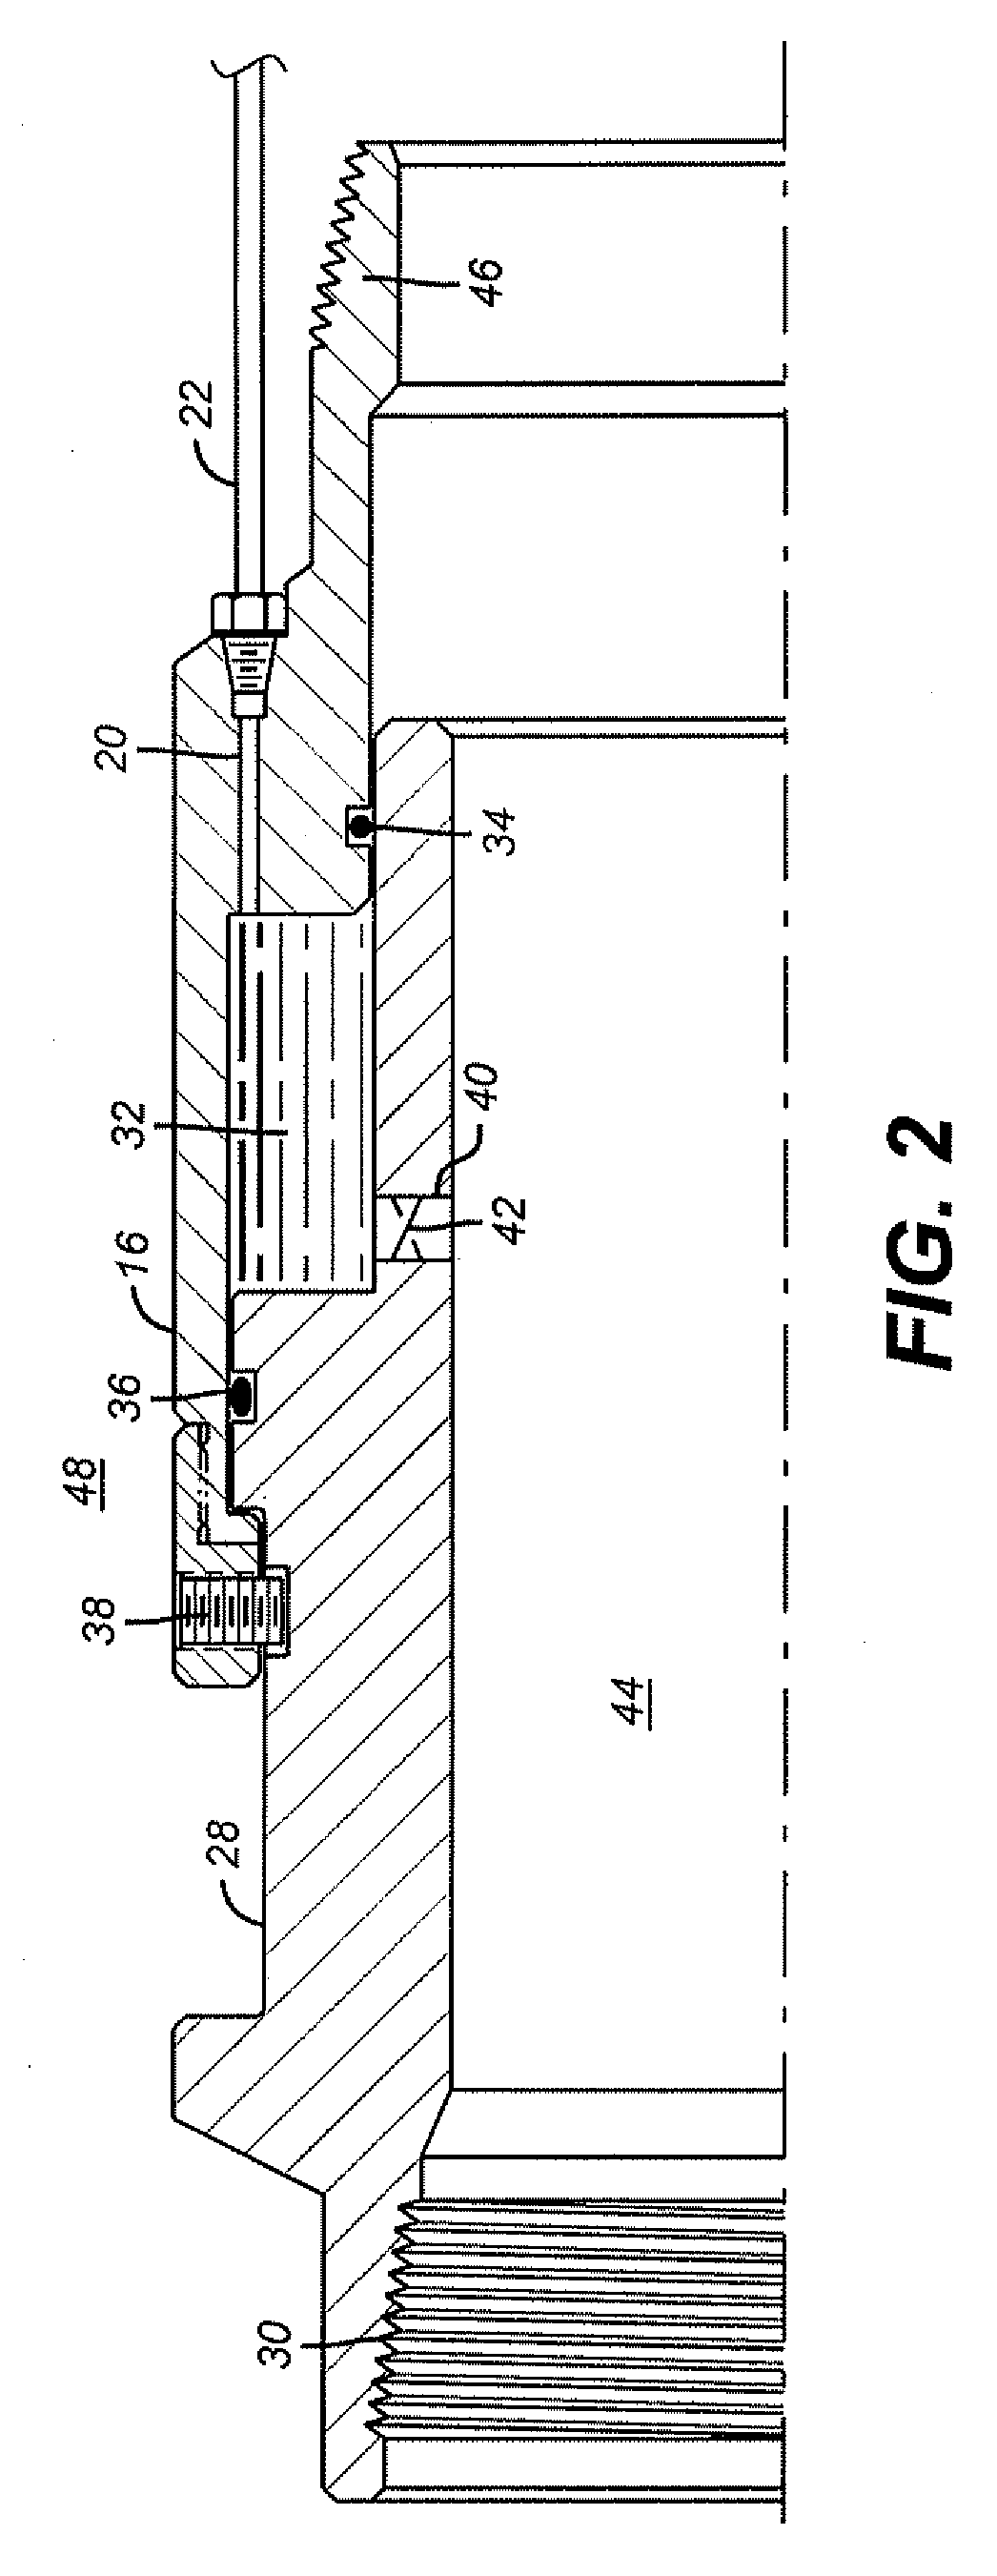 String Mounted Hydraulic Pressure Generating Device for Downhole Tool Actuation